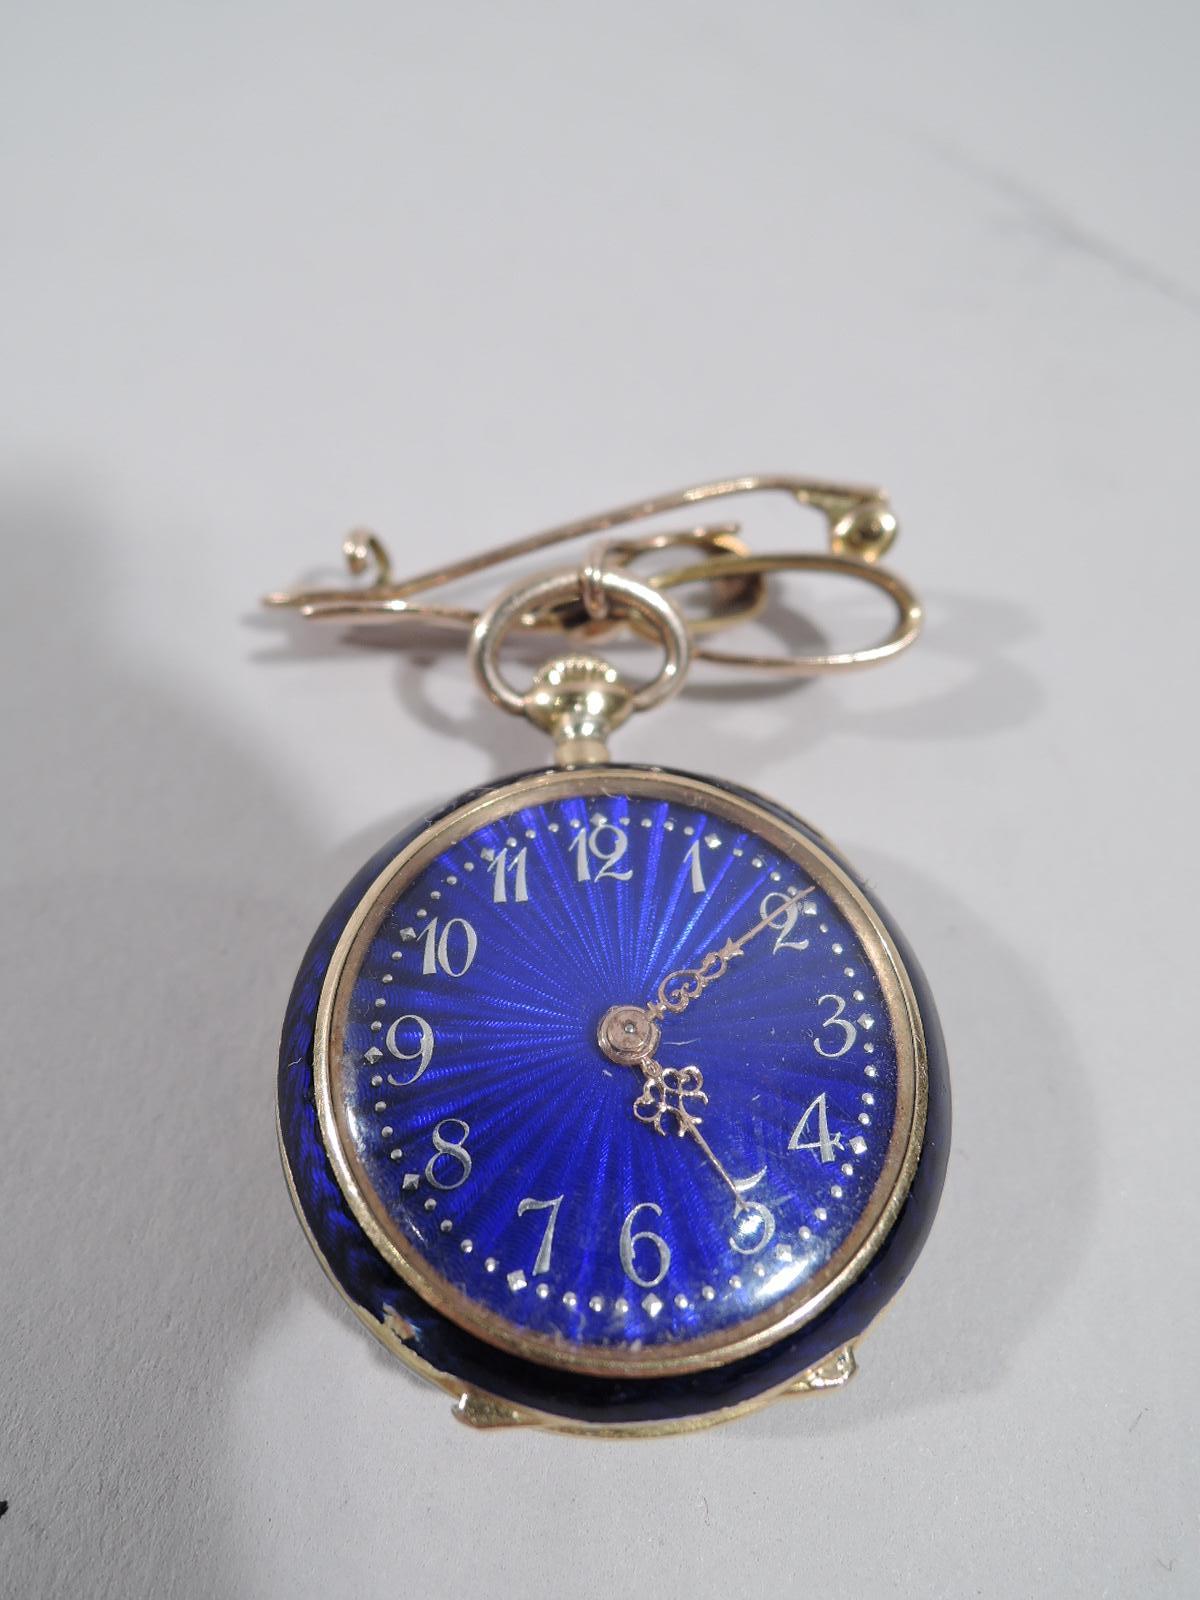 Delightful French 18k gold and cobalt blue enamel pendant watch with 9k bow mount. Guilloche face with 2 pierced hands and Arabic numerals. Back inlaid with rose-cut diamonds and rubies forming a fleur de lis. Vive la France! Interior has engraved